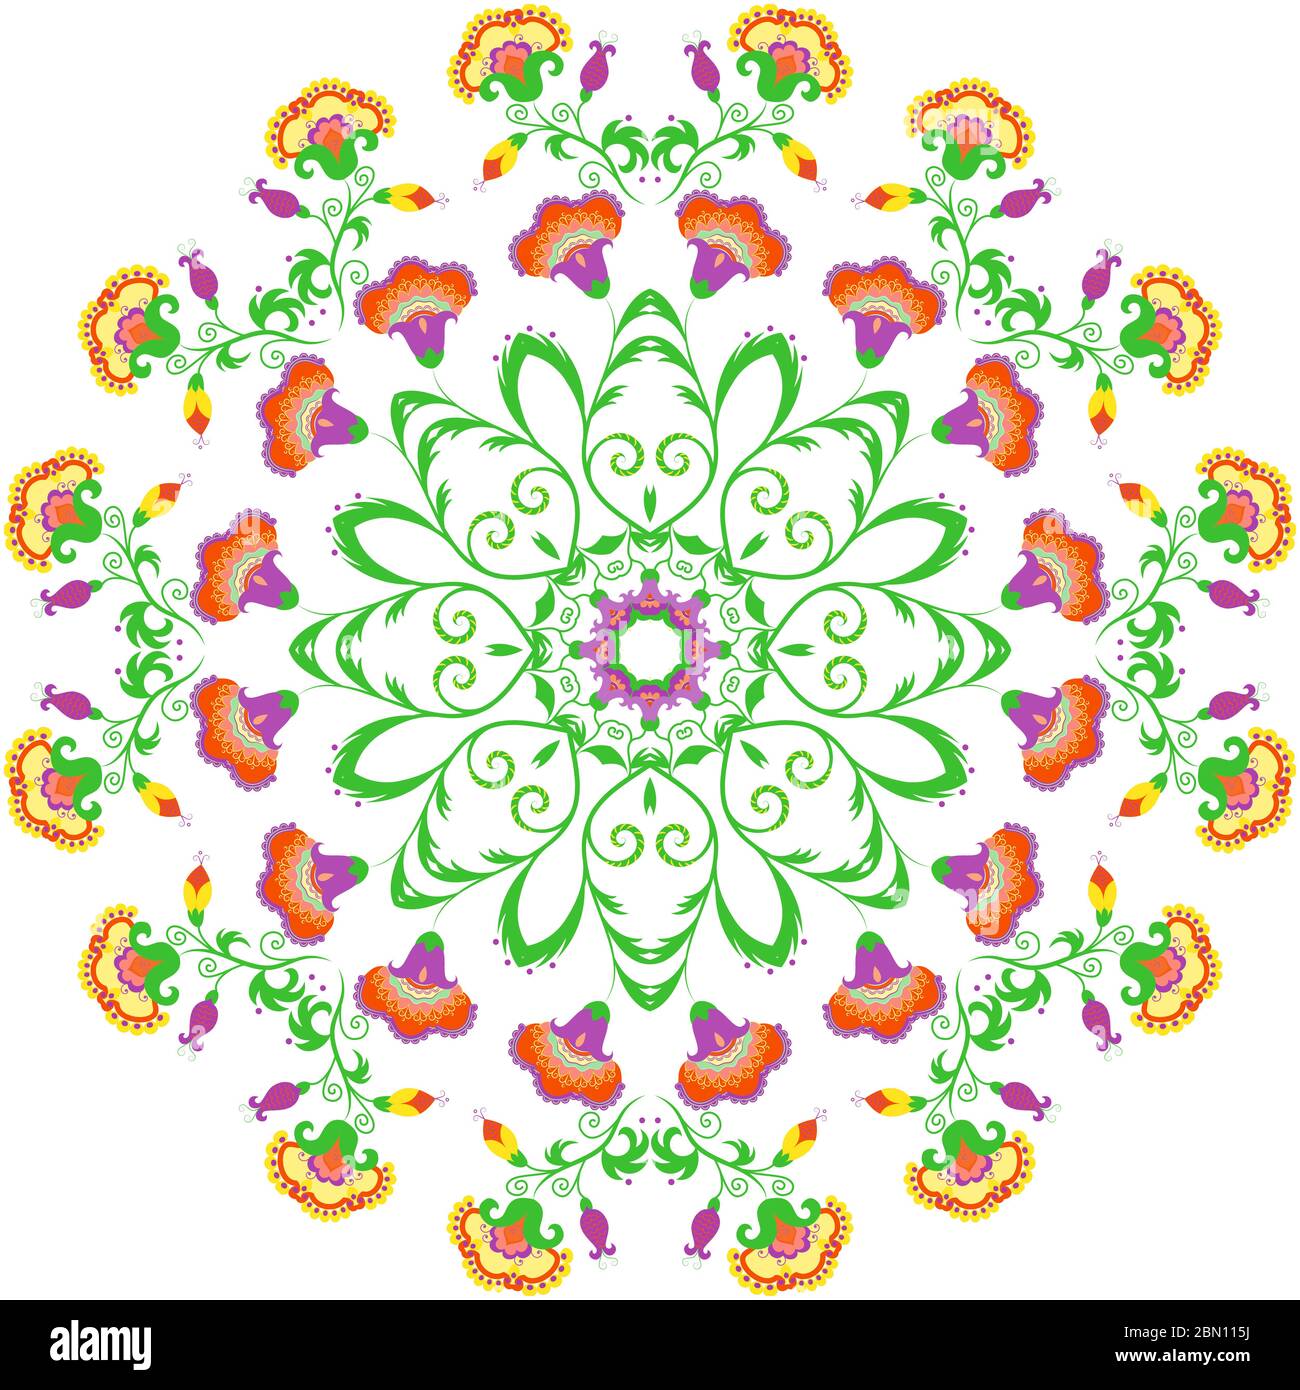 Abstract round ornament, mandala with indian styled flowers. Colorful circular floral motif, pattern isolated on white background Stock Vector